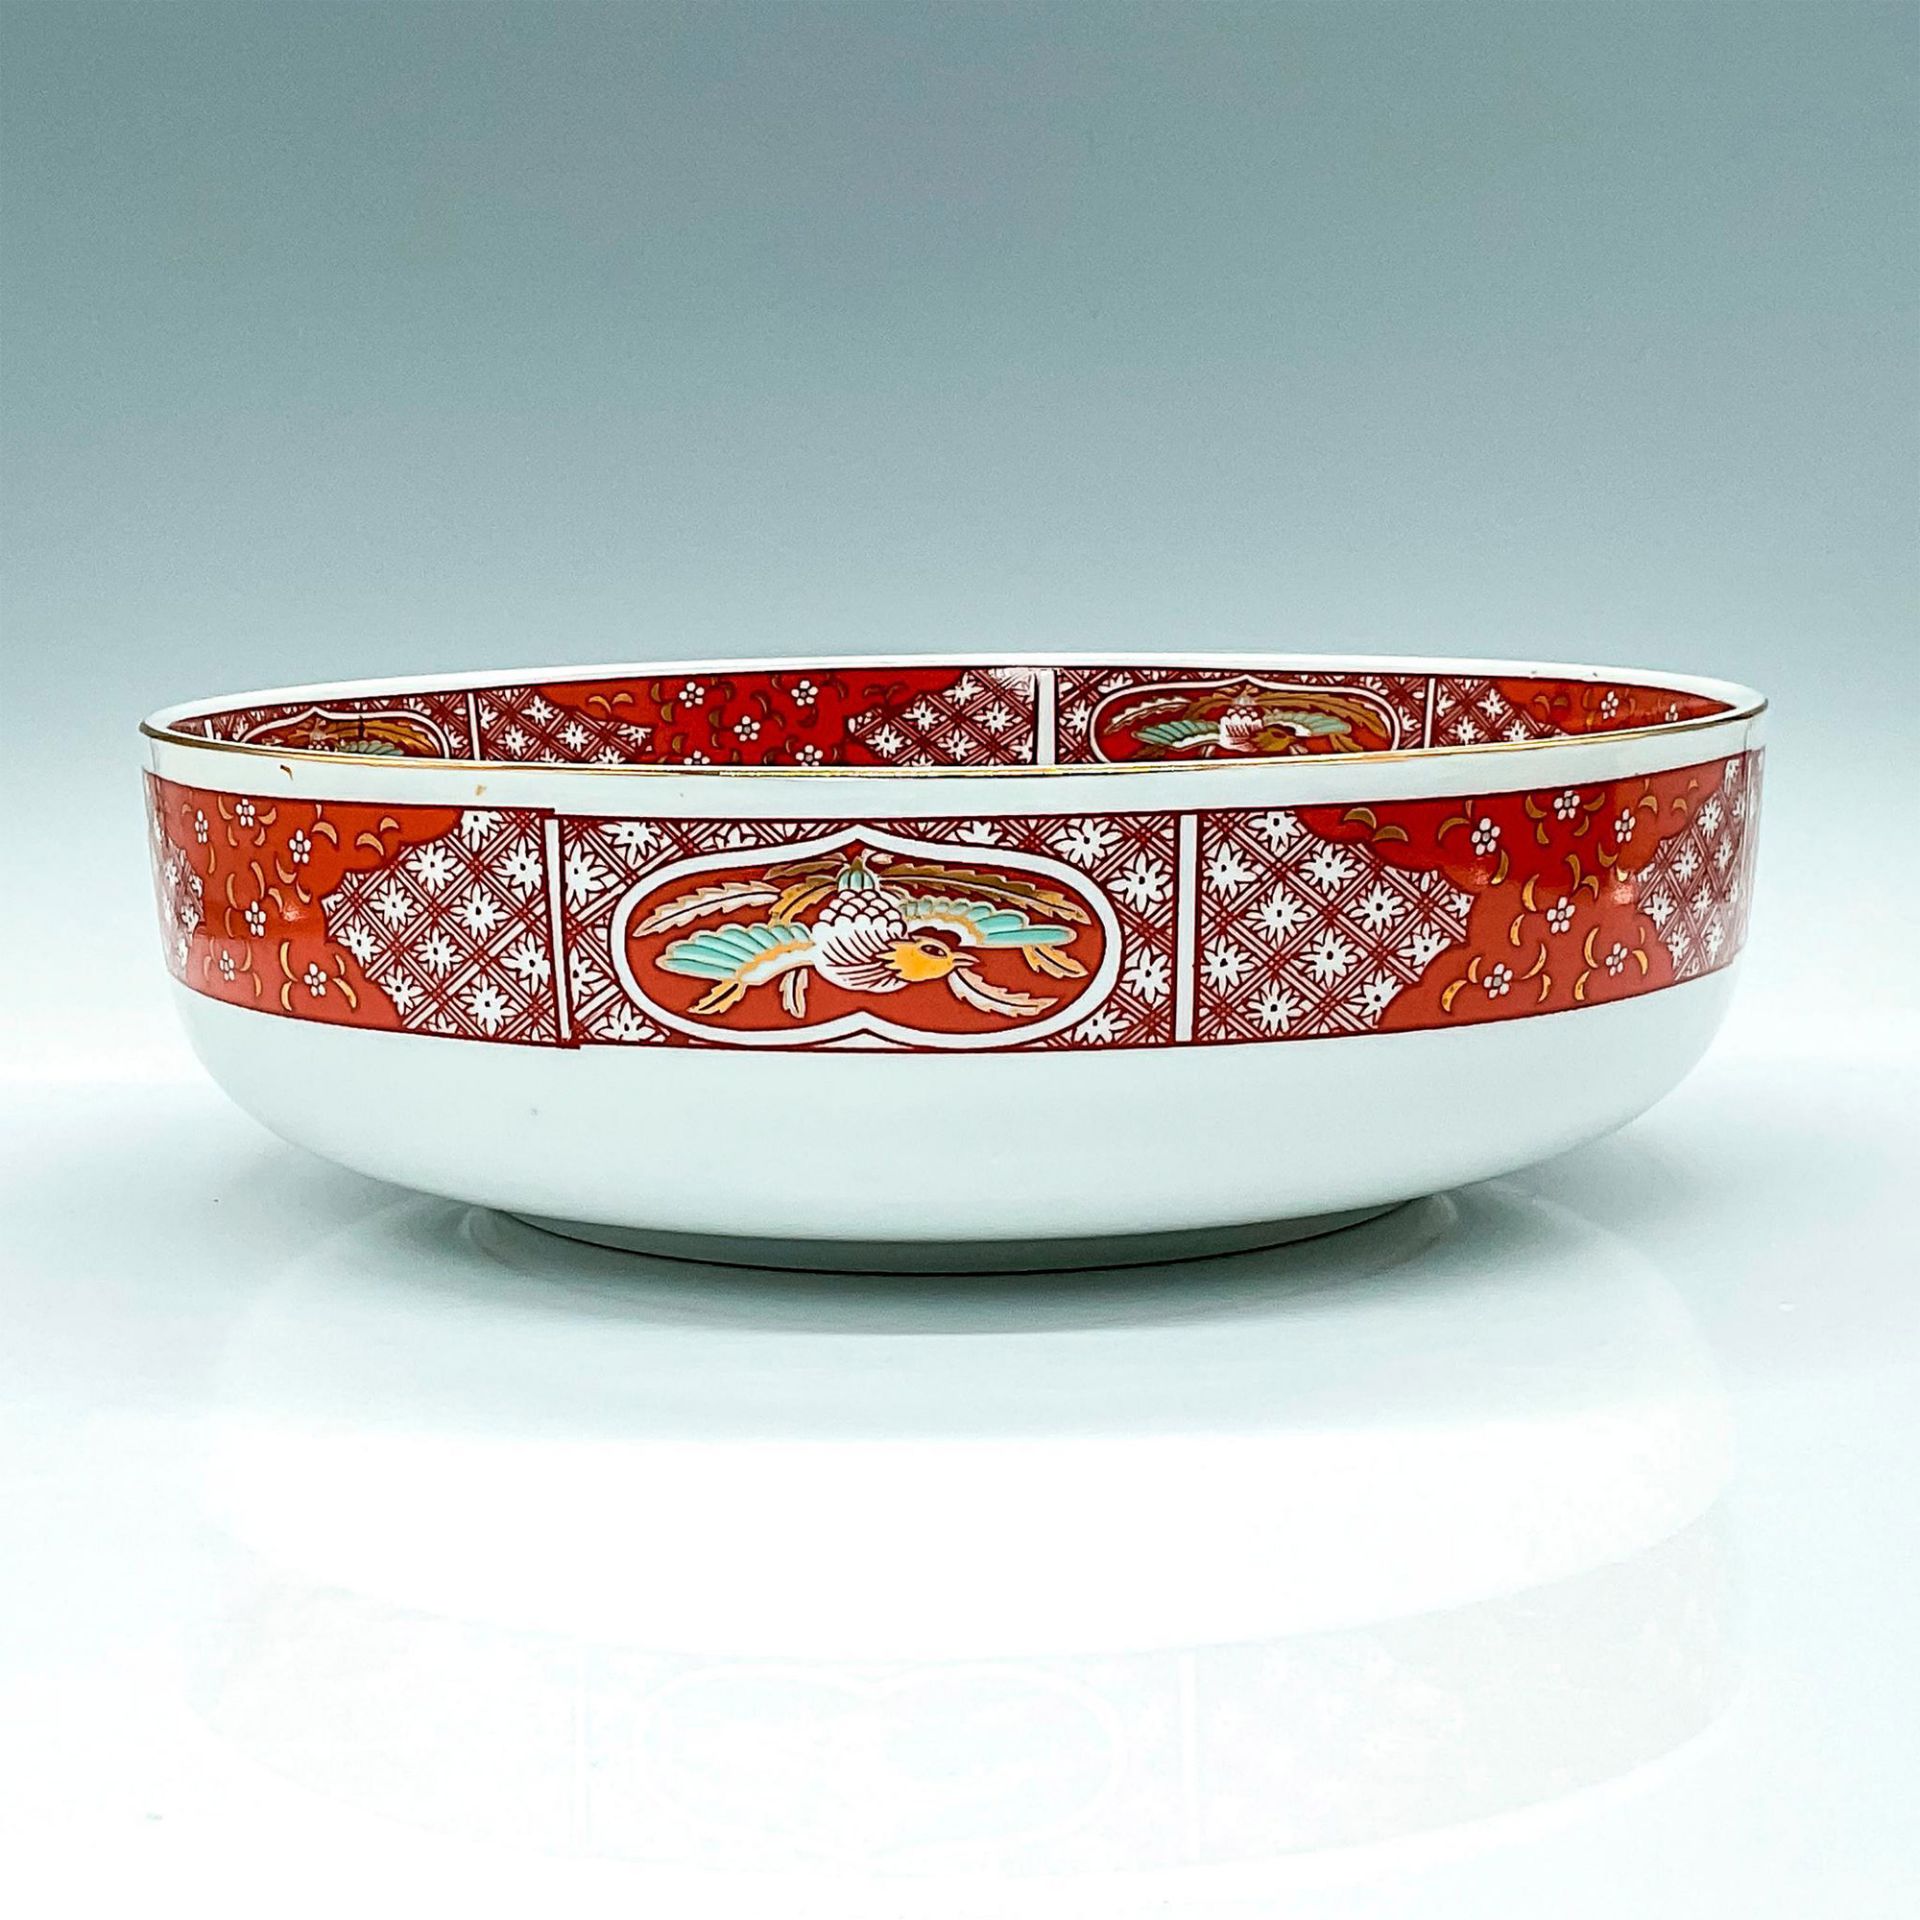 Imari Style Porcelain Rice Bowl w/Mystical Peacock Gold Accents - Image 2 of 3